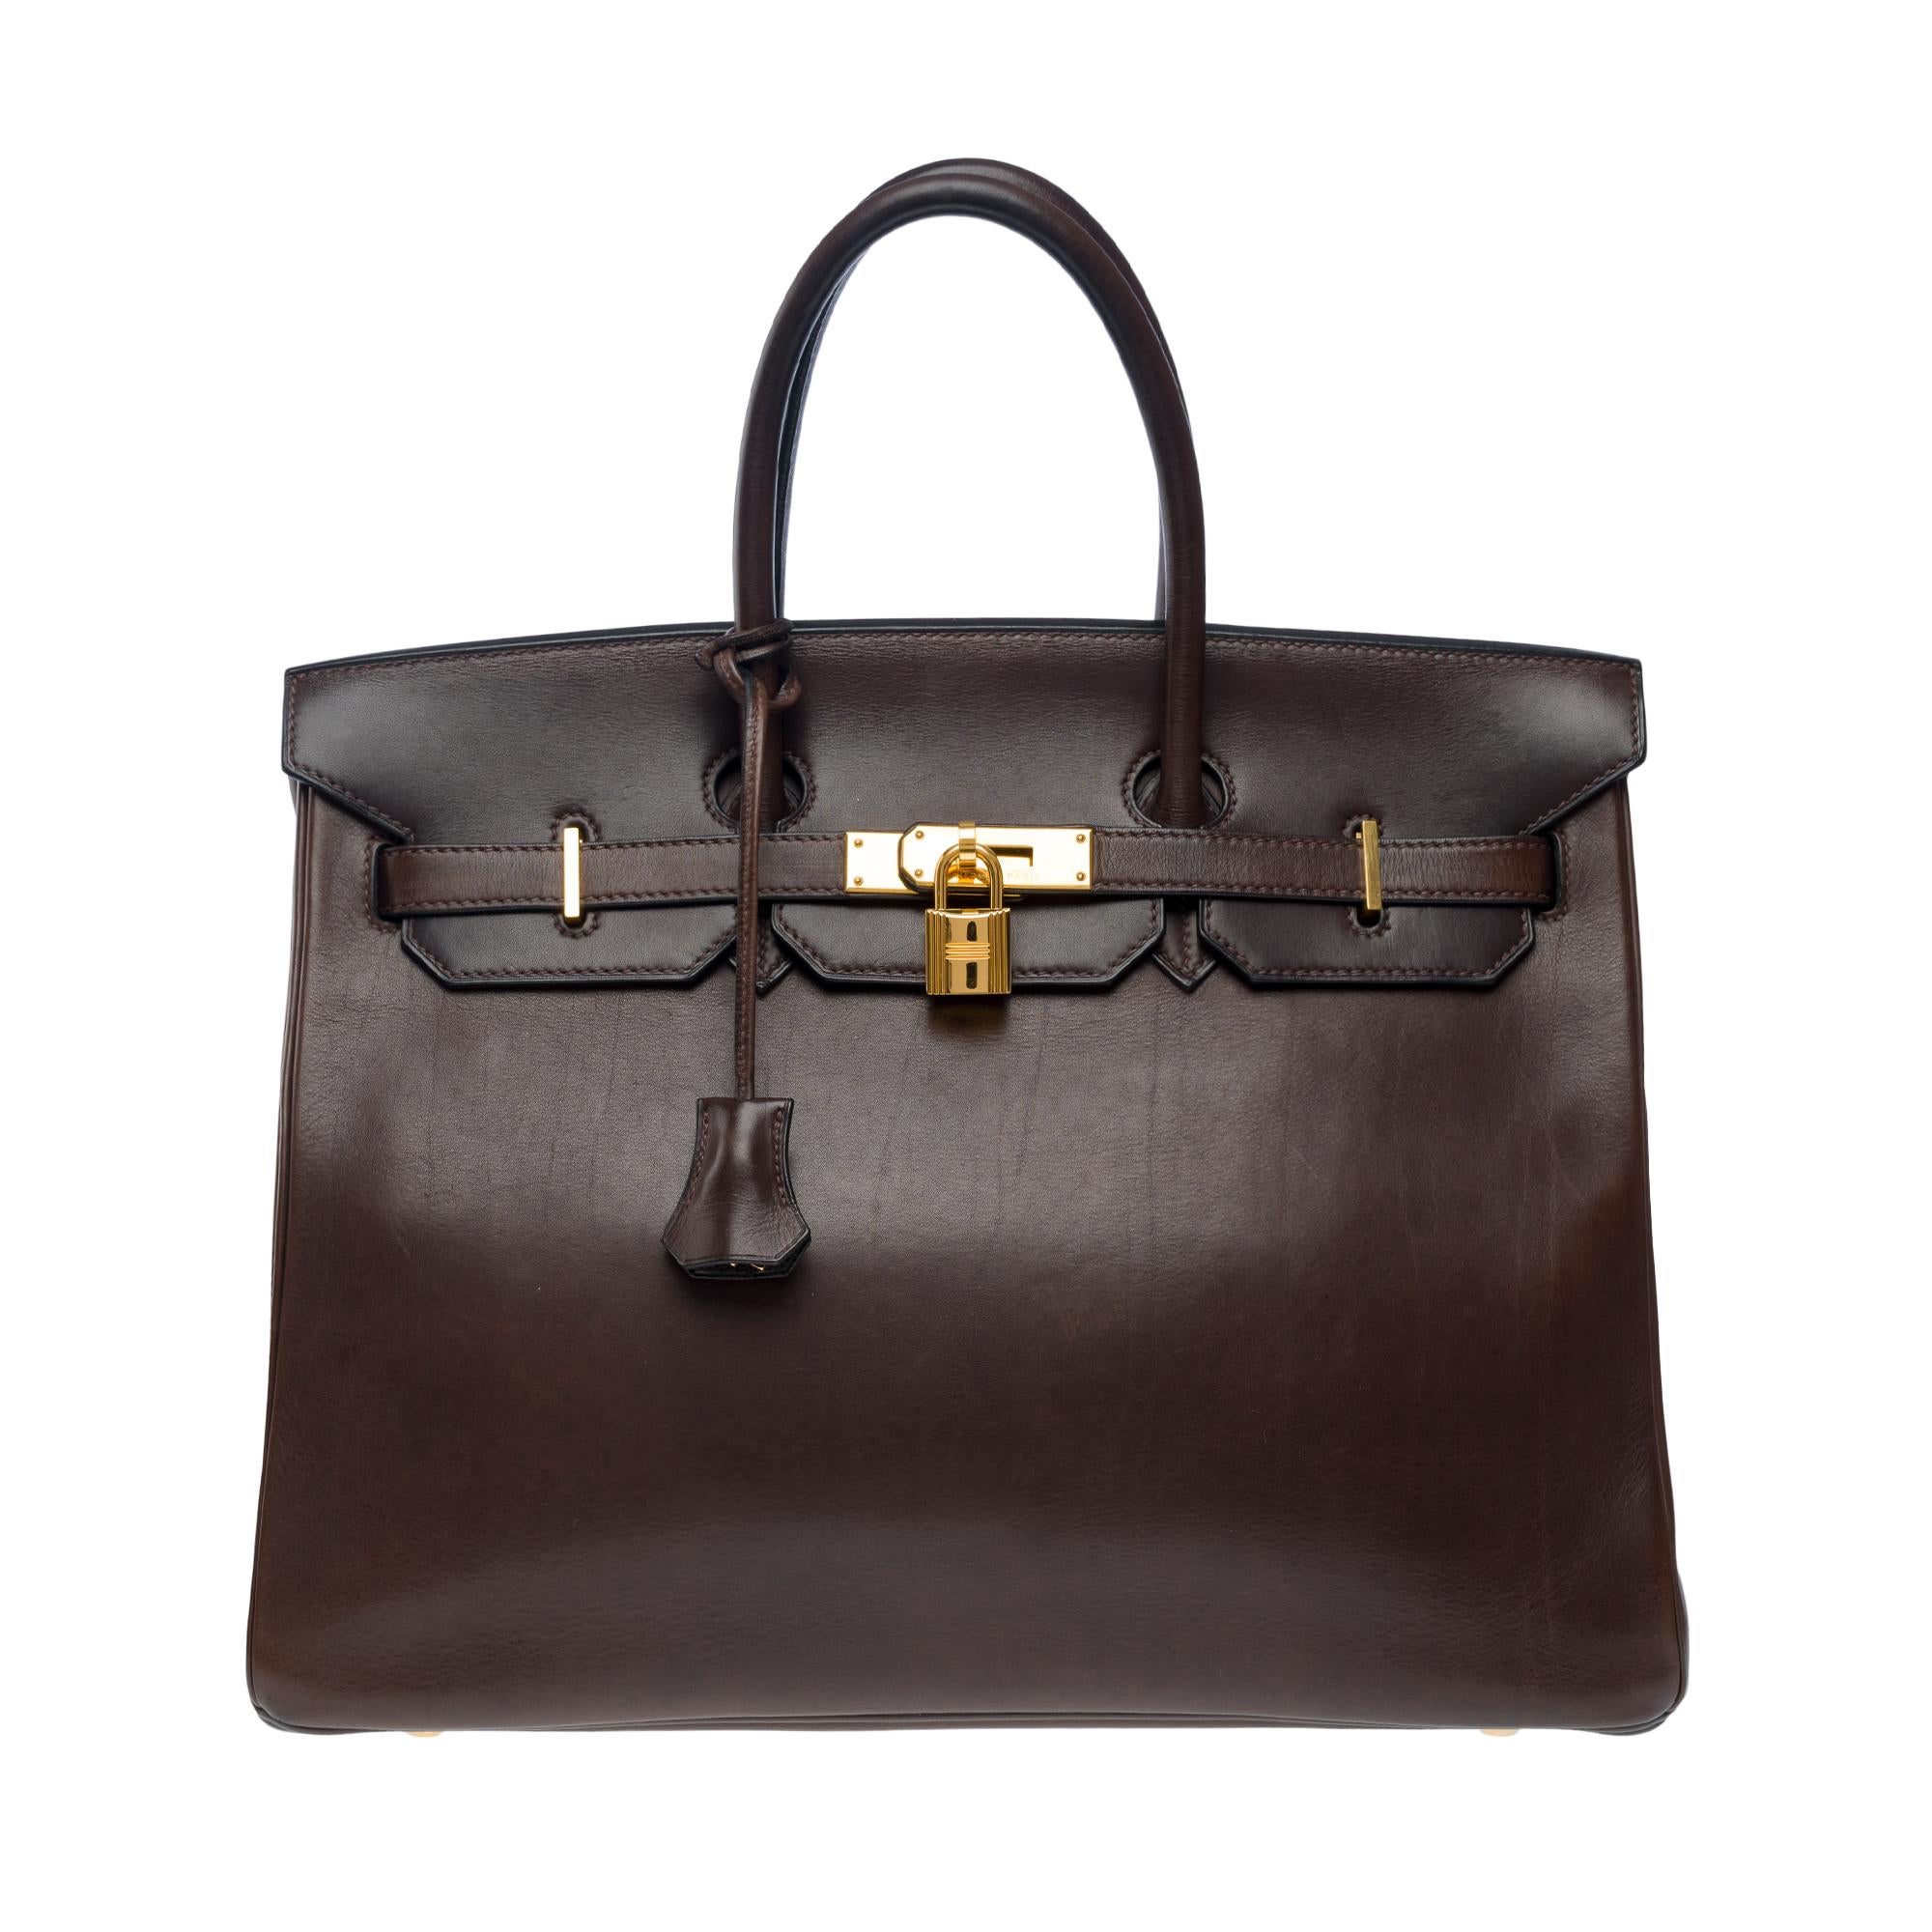 Rare & Stunning Hermes Birkin 35 handbag in Ebony Brown Barenia leather , gold plated metal trim, double handle in brown leather for a hand carry

Flap closure
Hand leather inner lining, one zipped pocket, one patch pocket
Signature: 